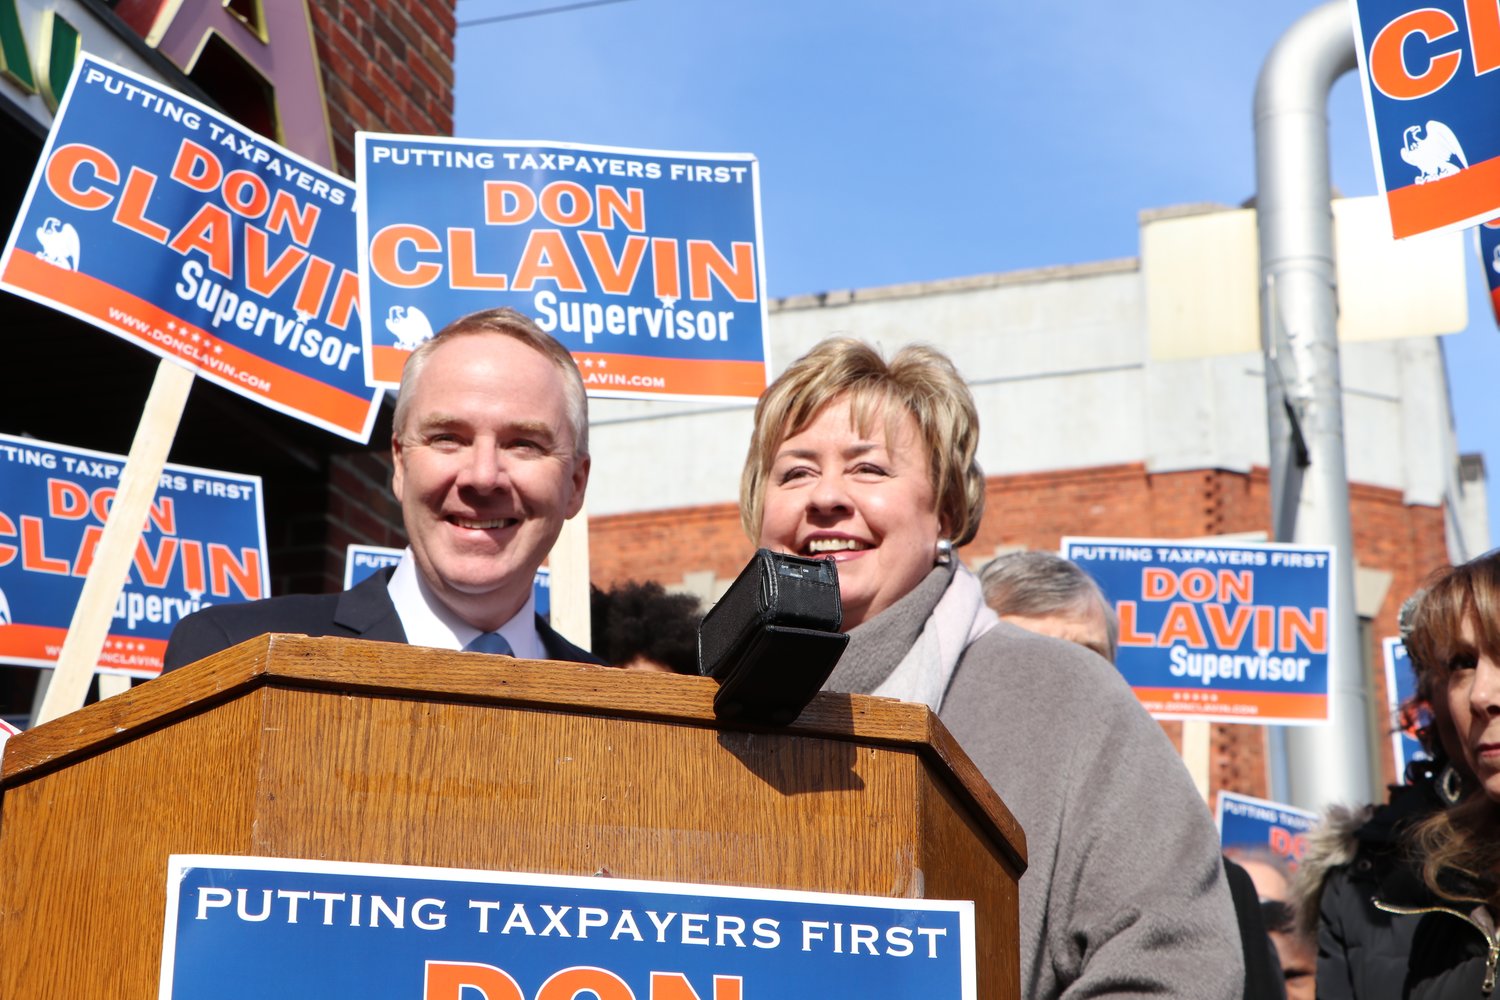 Town of Hempstead Receiver of Taxes Donald Clavin, alongside Kate Murray, announced his bid to become Town supervisor on Feb. 19.